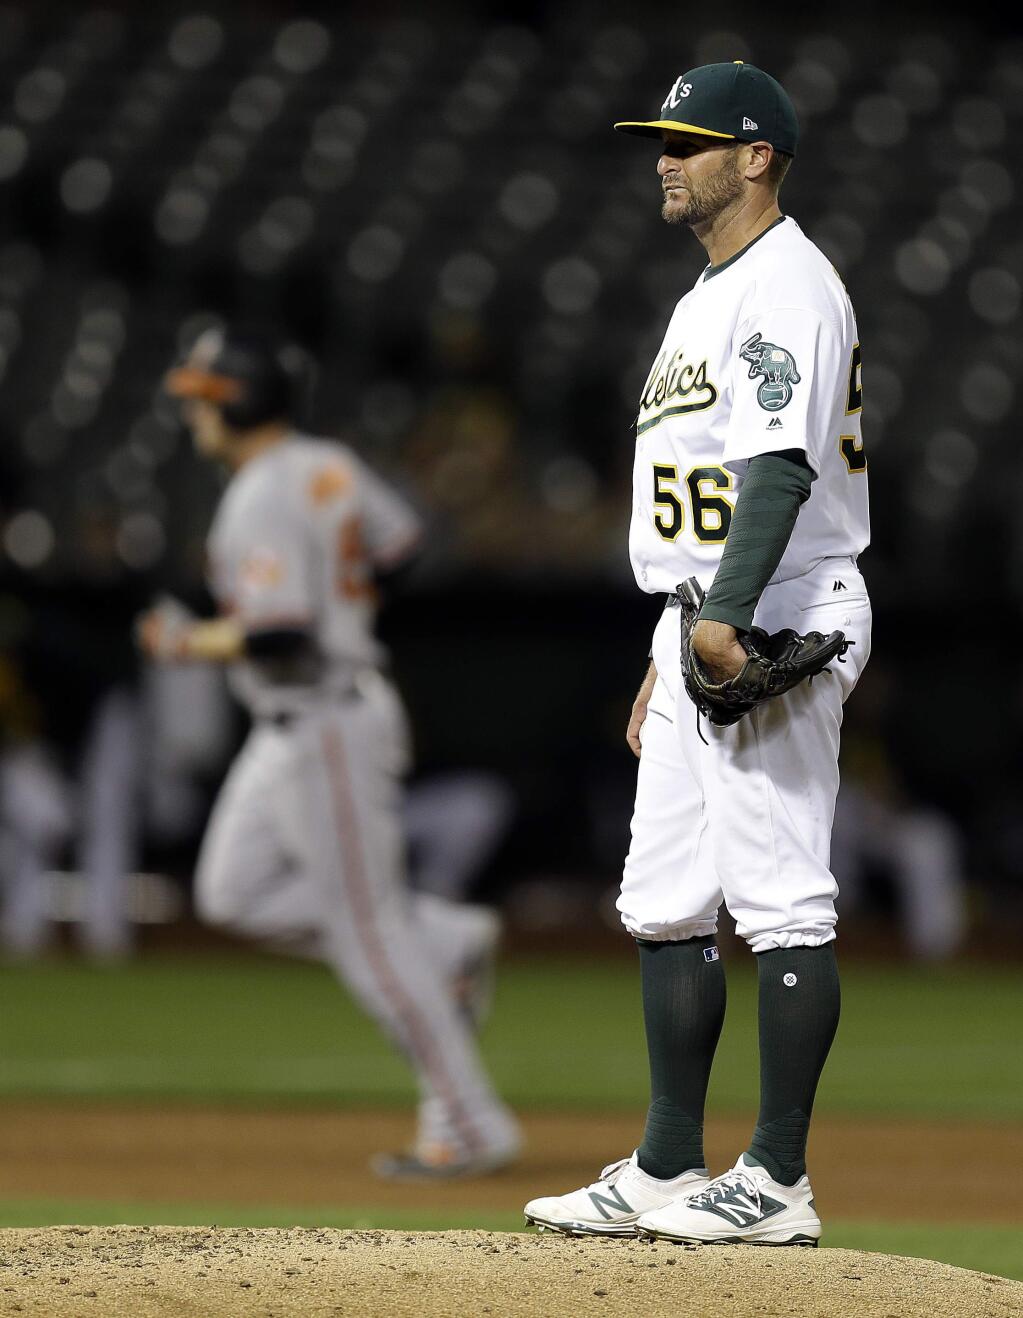 Oakland Athletics pitcher Chris Smith waits for the Baltimore Orioles' Mark Trumbo, left, to run the bases, after Trumbo hit a home run during the sixth inning Thursday, Aug. 10, 2017, in Oakland. (AP Photo/Ben Margot)